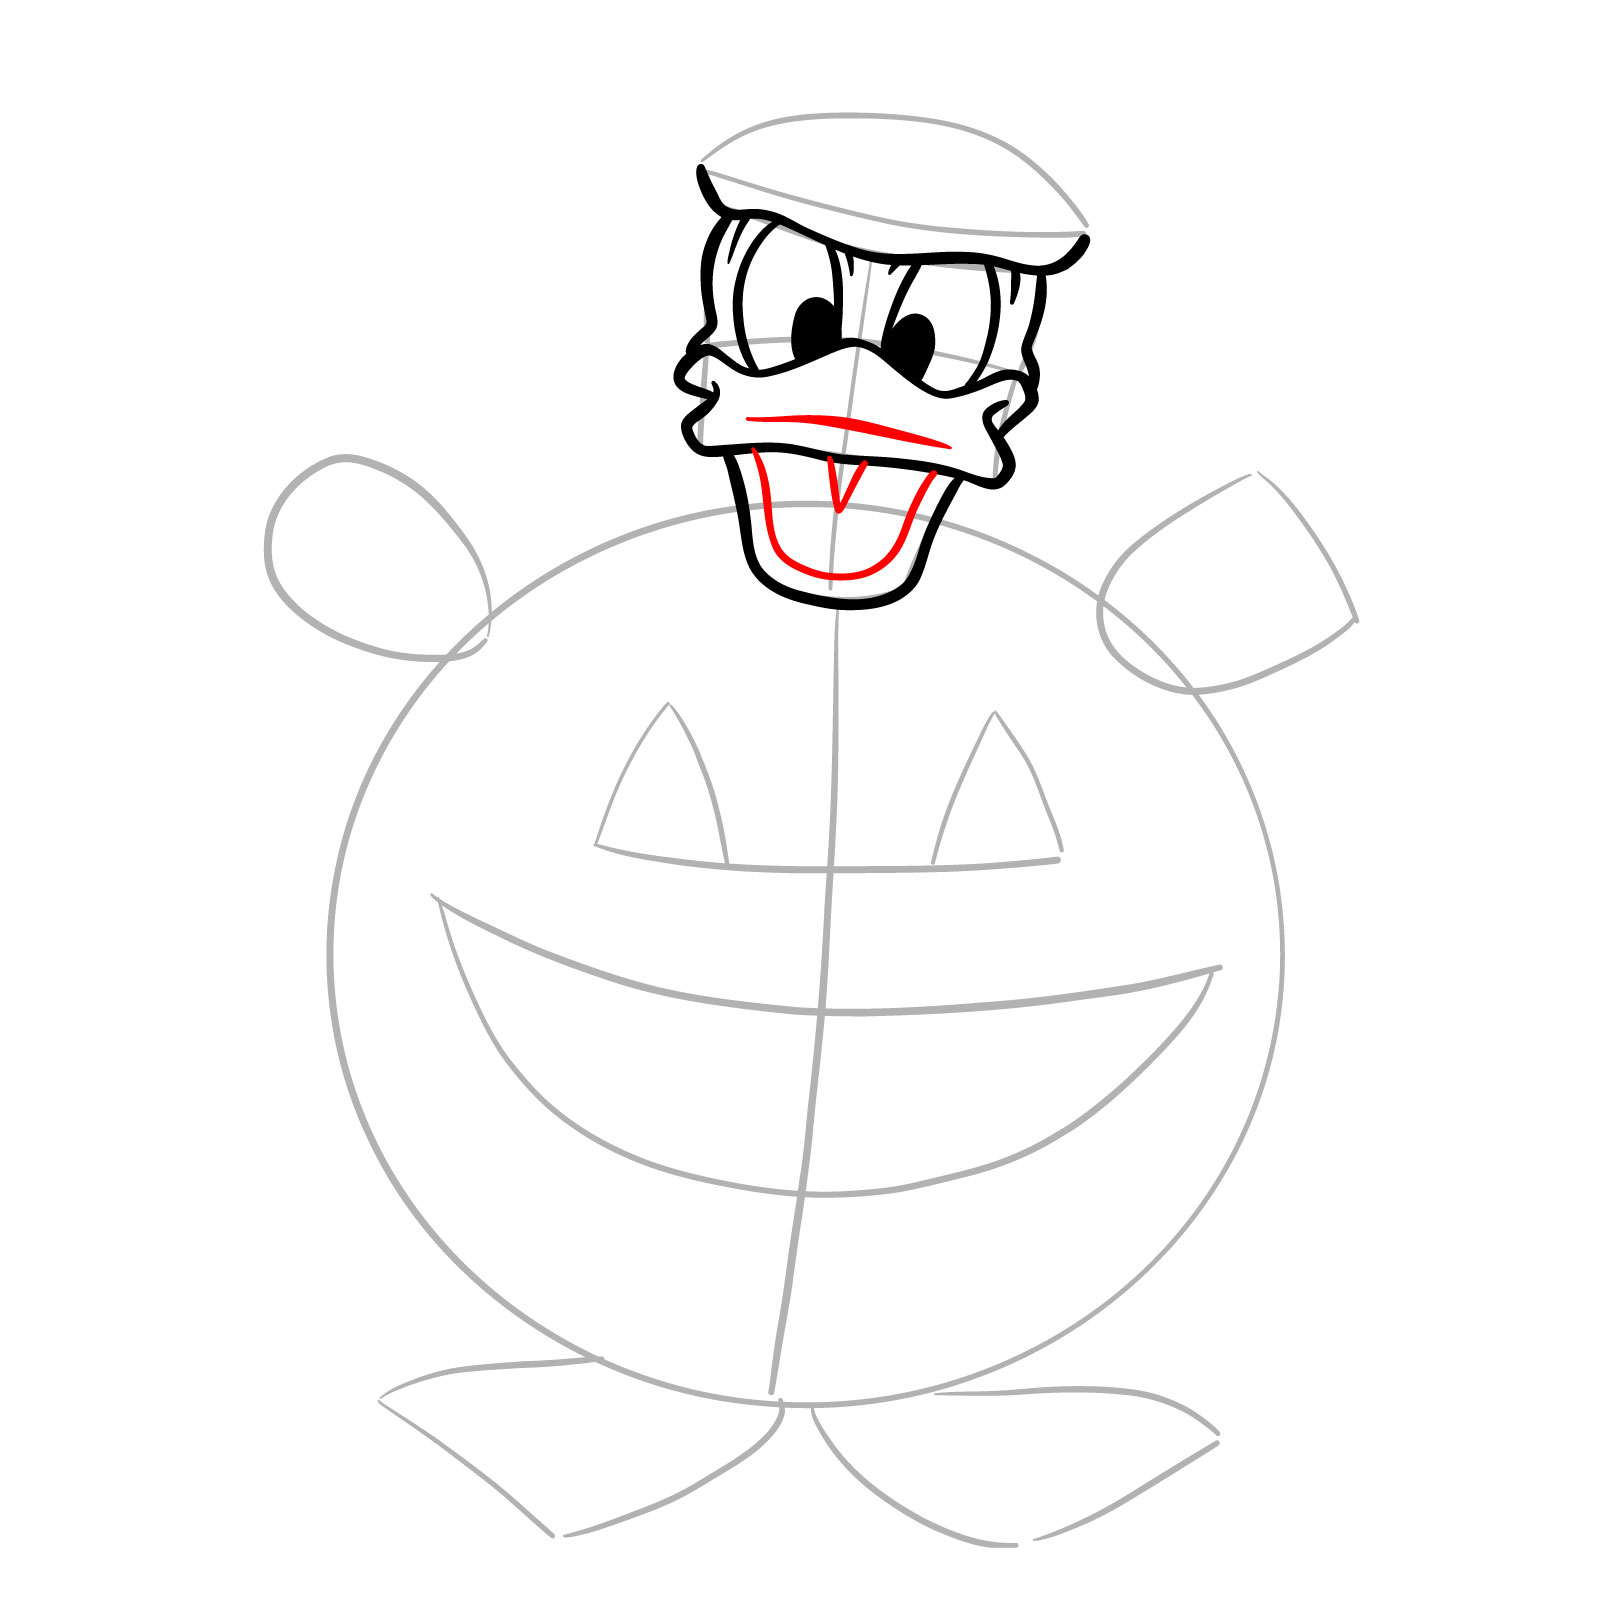 How to draw Halloween Donald Duck in a jack o'lantern - step 10